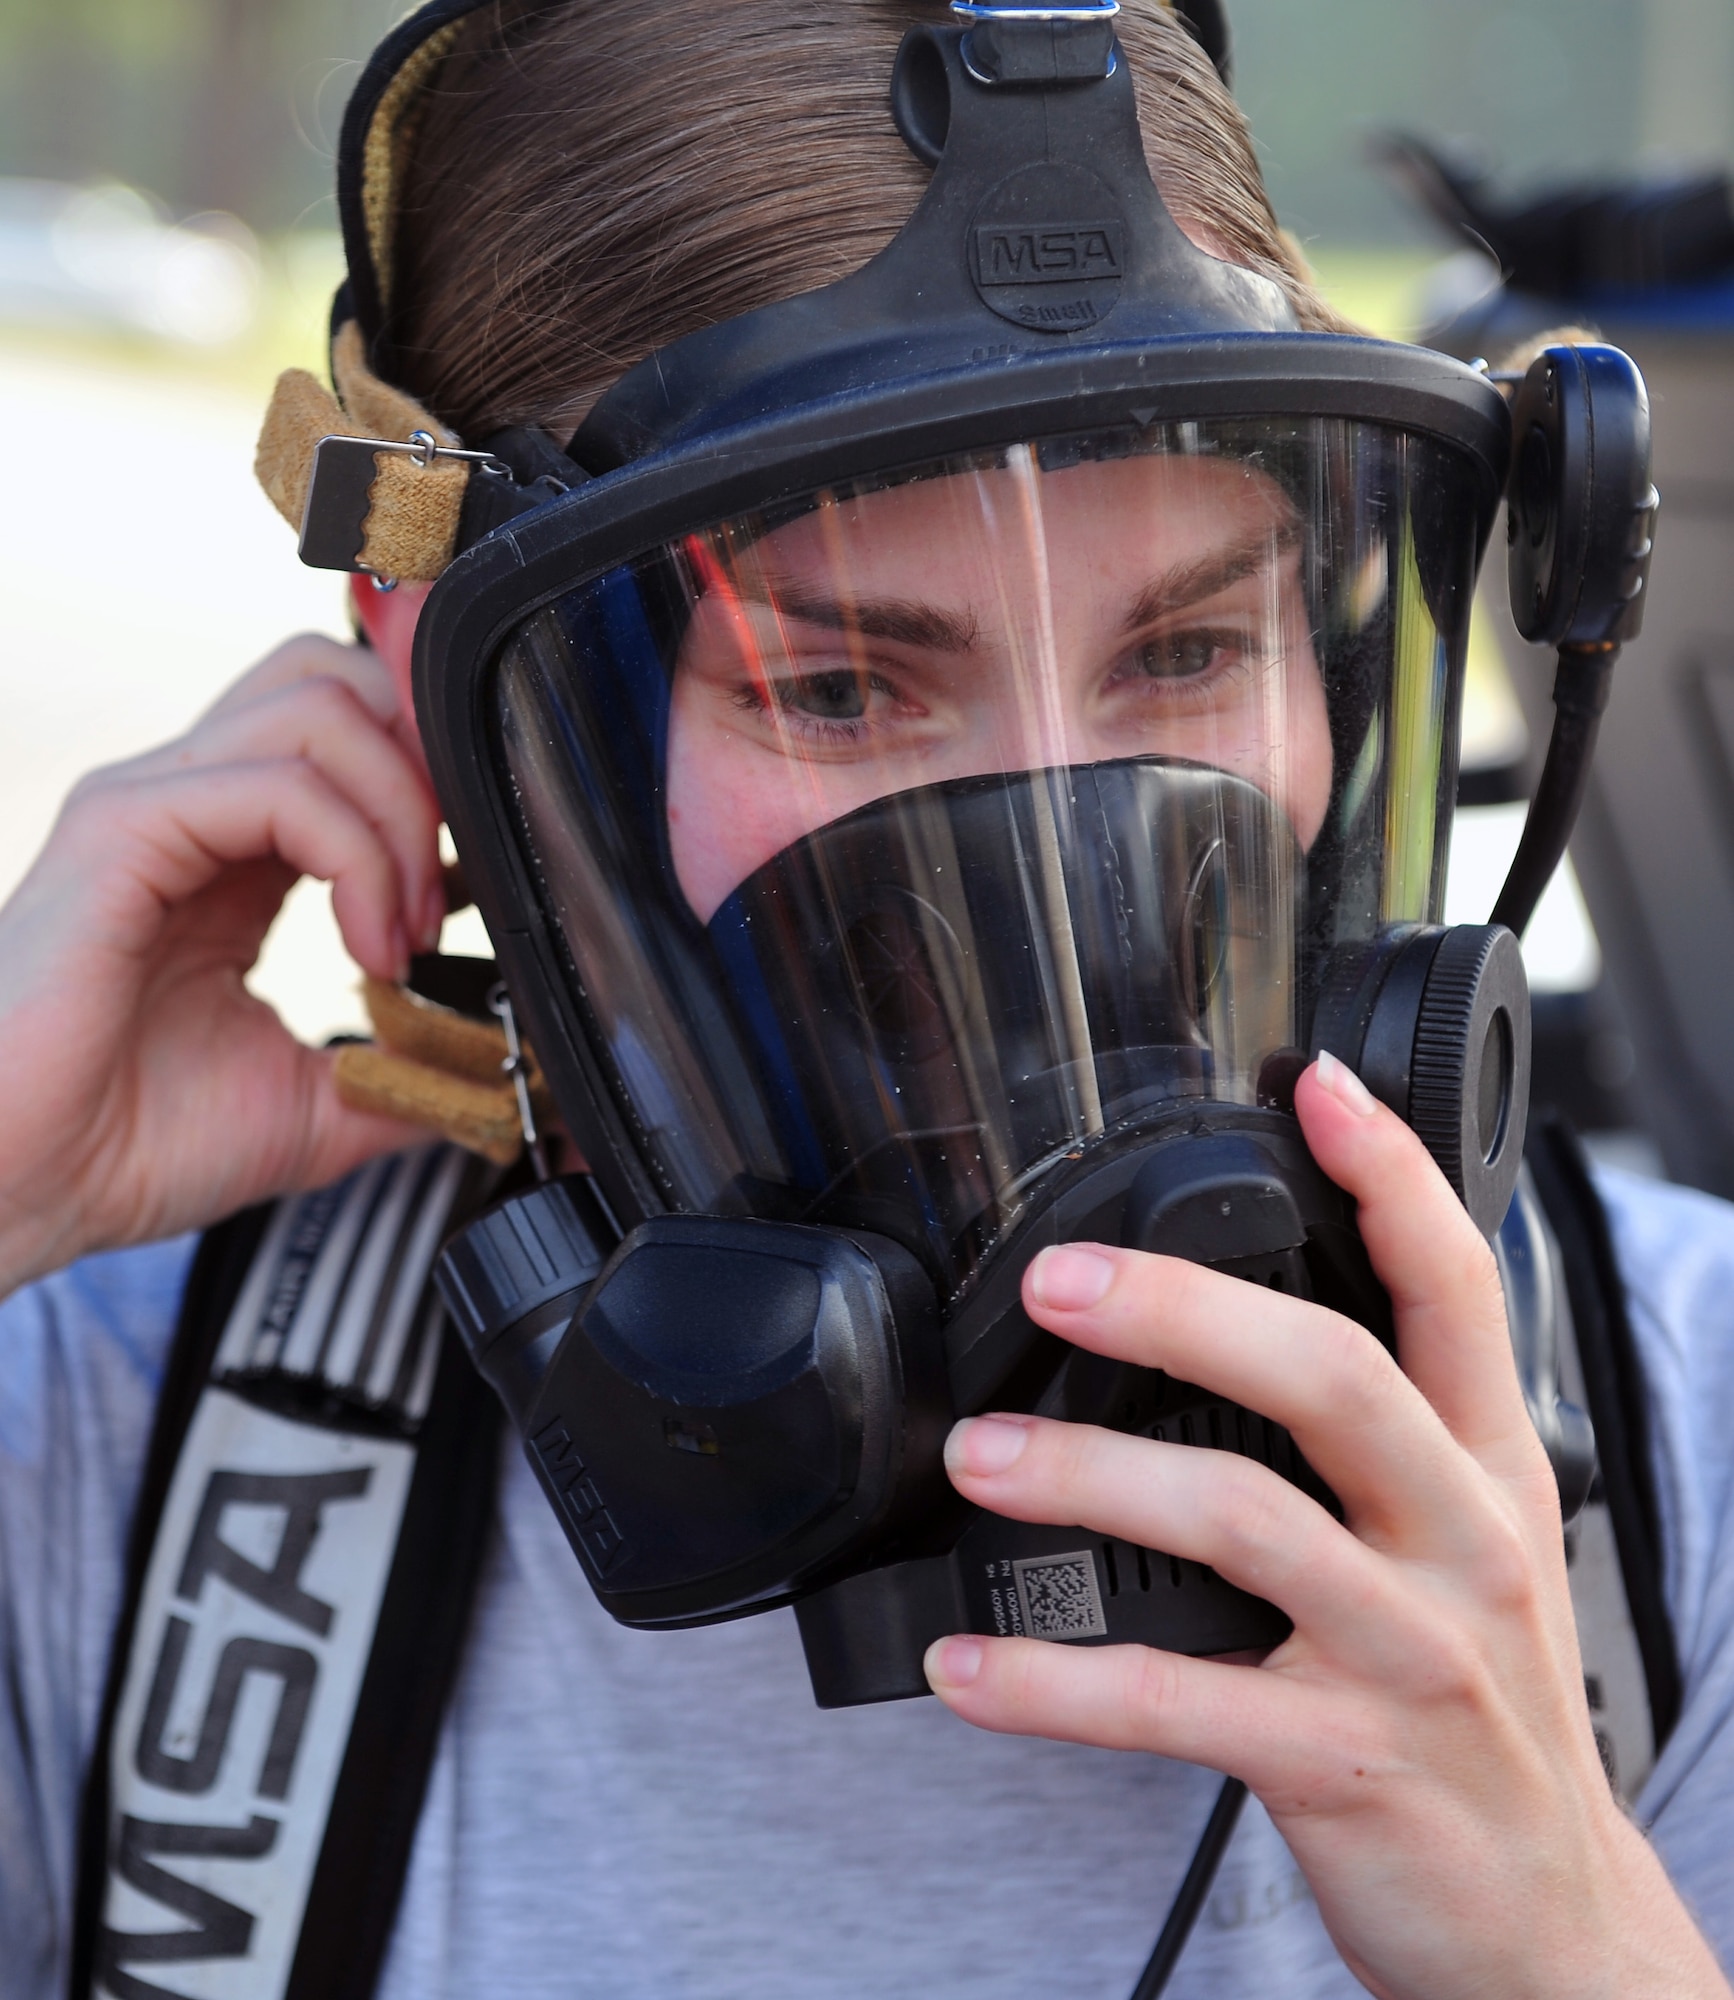 Tech. Sgt. Jessica Clayton, 4th Civil Engineer Squadron emergency management plans section NCO in charge, dons a gas mask during an integrated base emergency response capabilities training exercise, June 24, 2015, at Seymour Johnson Air Force Base, North Carolina. Gas masks are used to protect individuals from harmful airborne pollutants and toxic gases. (U.S. Air Force photo/Senior Airman John Nieves Camacho)